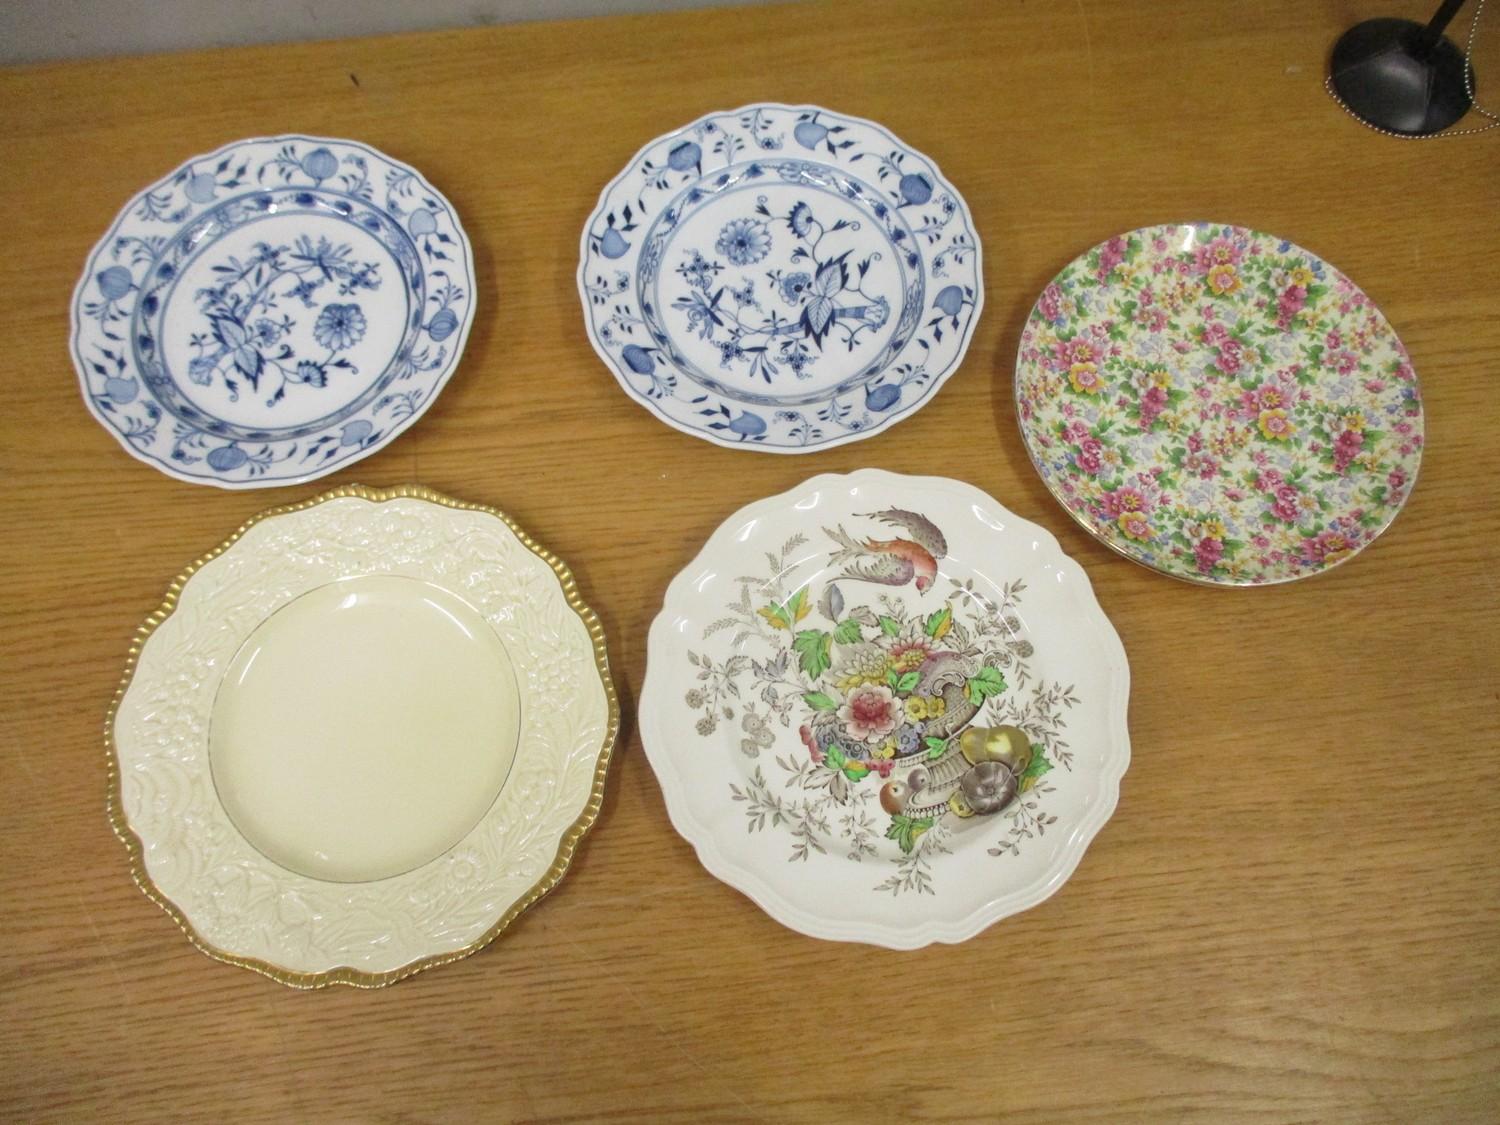 A pair of Meissen Onion pattern plates, 19th century, a Royal Doulton plate and two other plates